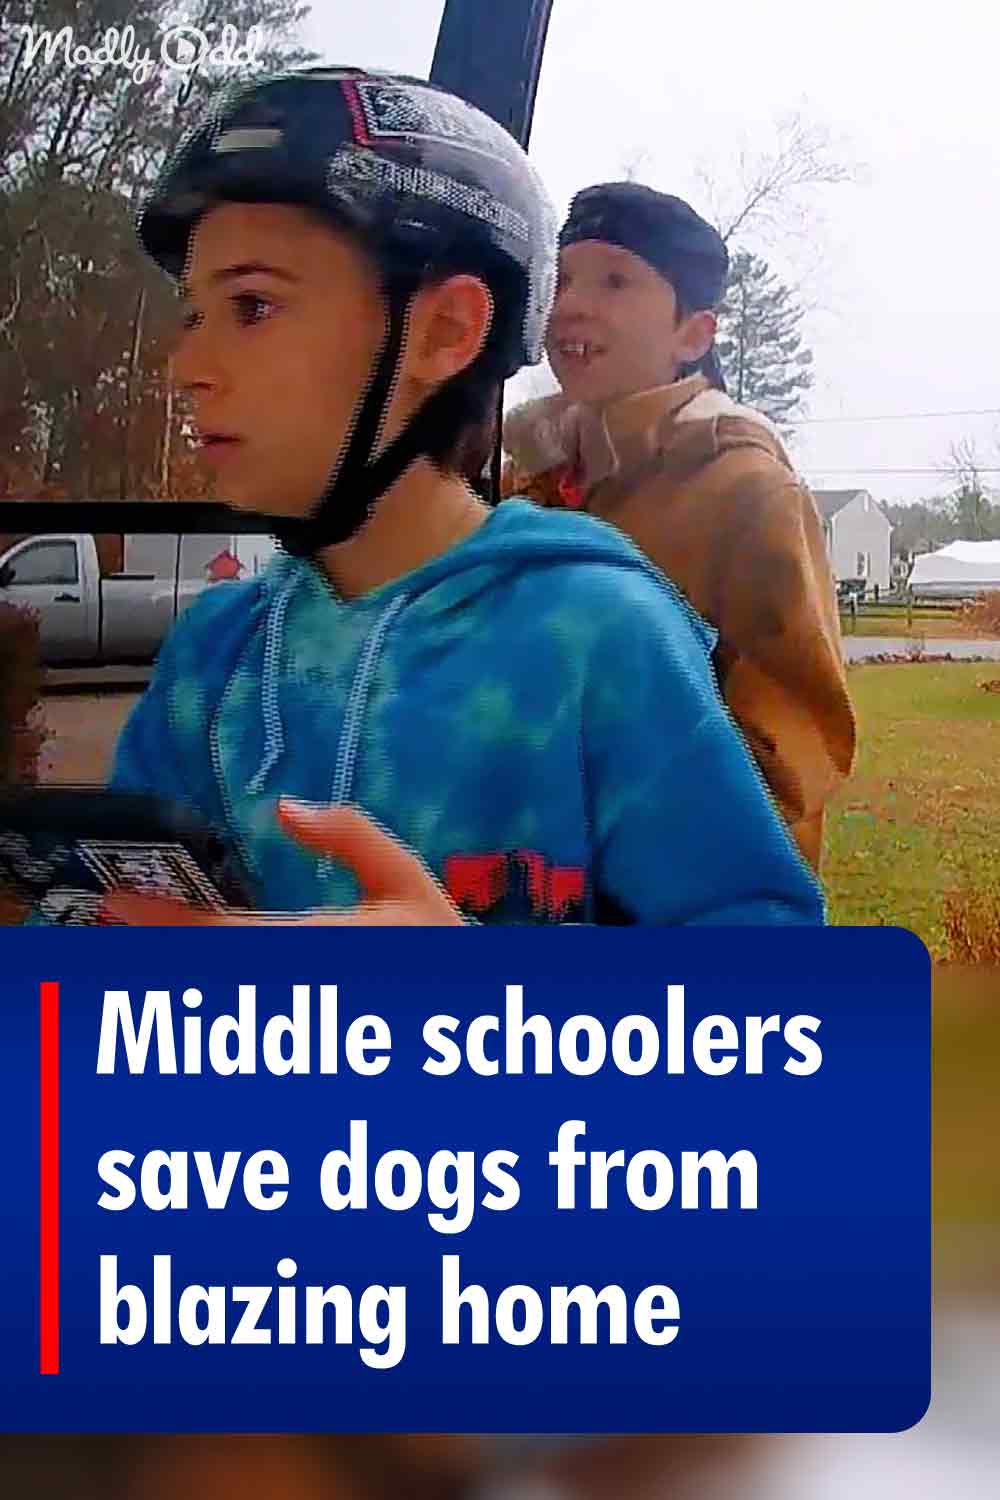 Middle schoolers save dogs from blazing home